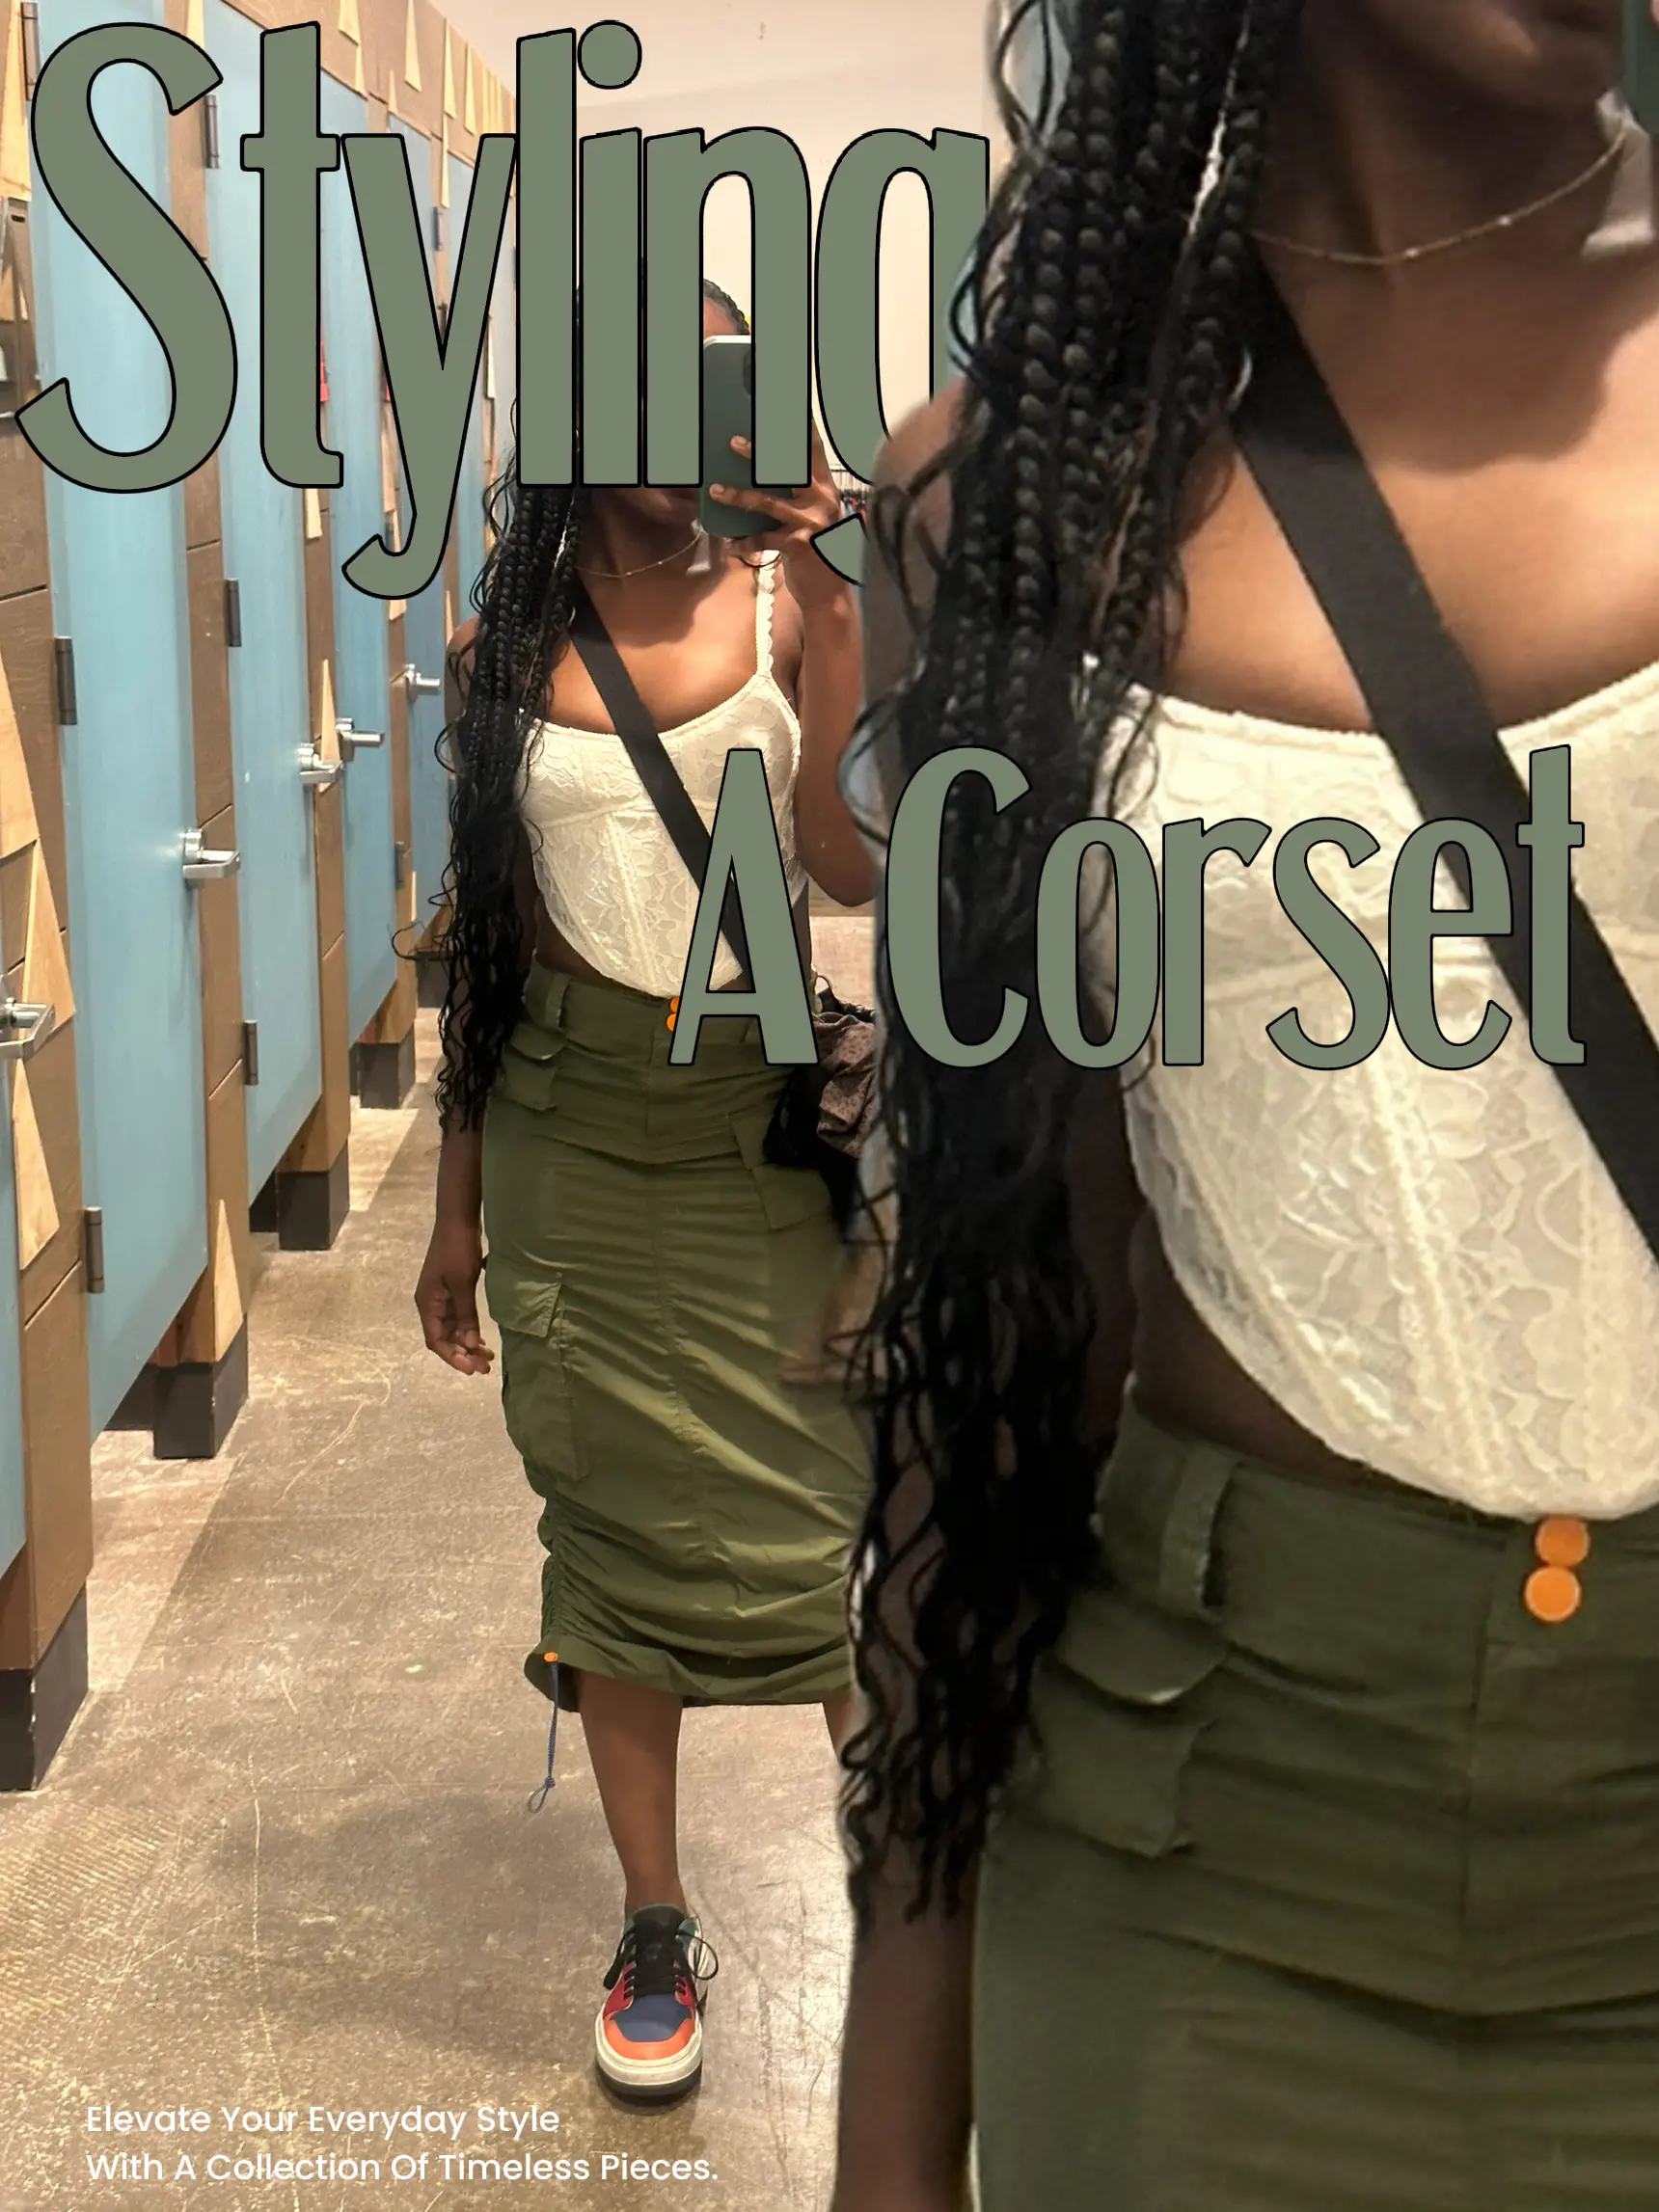 How to style: Corsets with Shirts 🖤, Gallery posted by Lauren Fisher